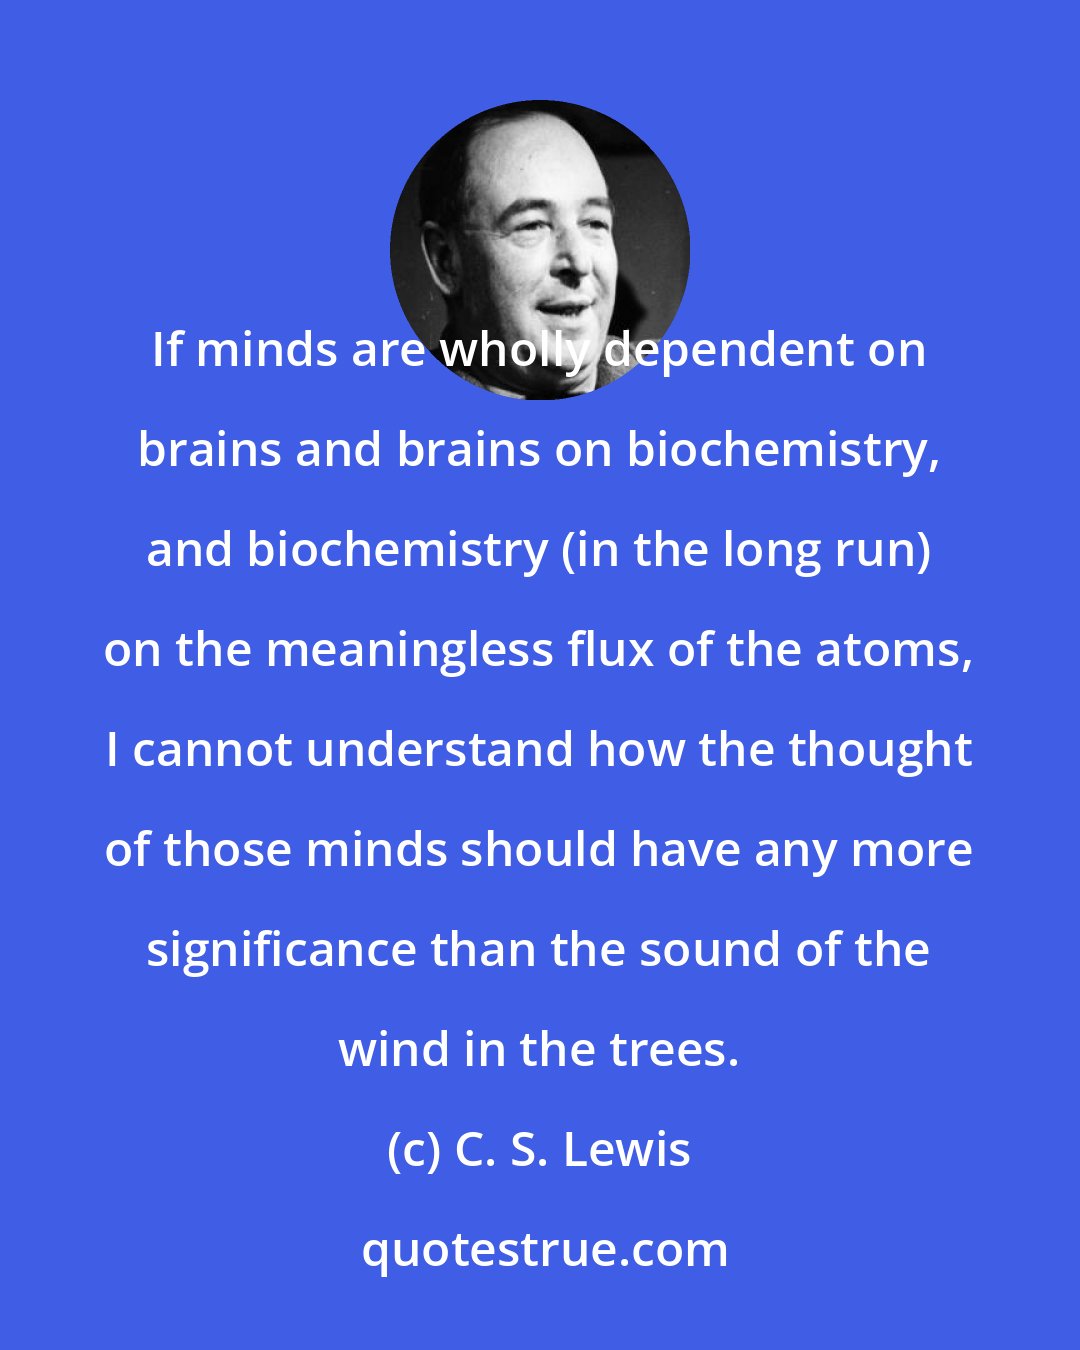 C. S. Lewis: If minds are wholly dependent on brains and brains on biochemistry, and biochemistry (in the long run) on the meaningless flux of the atoms, I cannot understand how the thought of those minds should have any more significance than the sound of the wind in the trees.